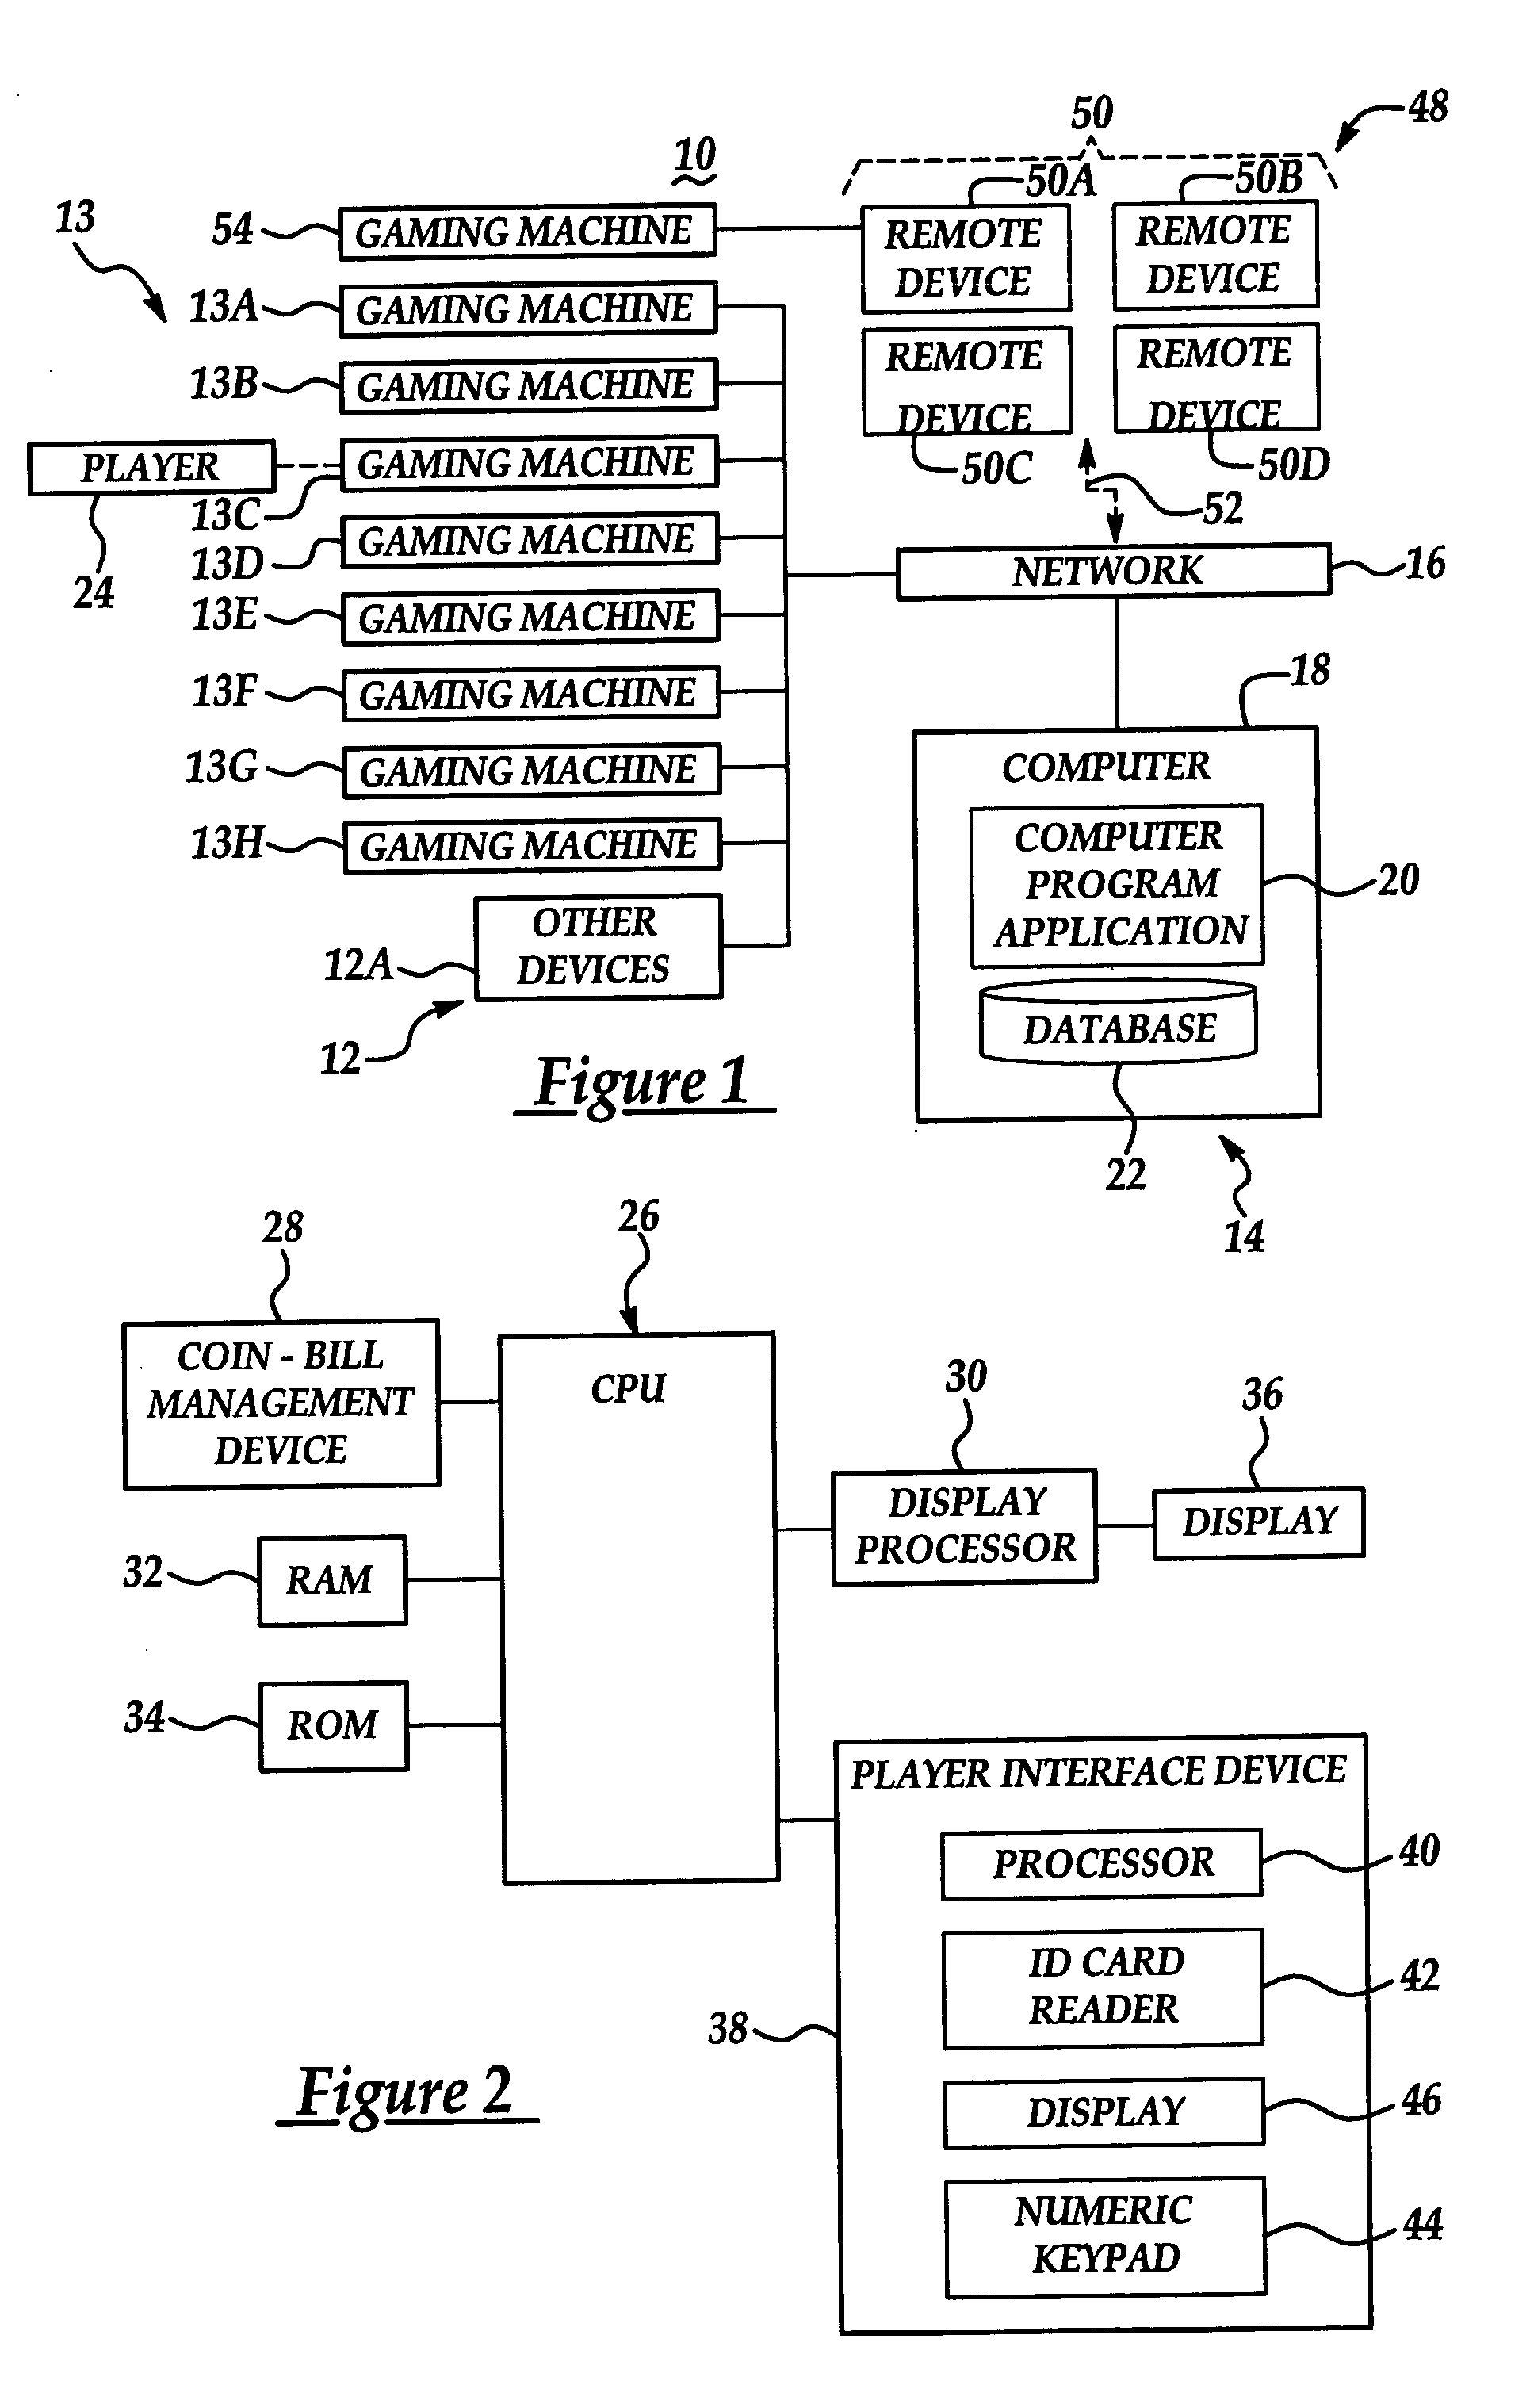 System and method for retrieving voucher information assigned to a player in a player tracking system